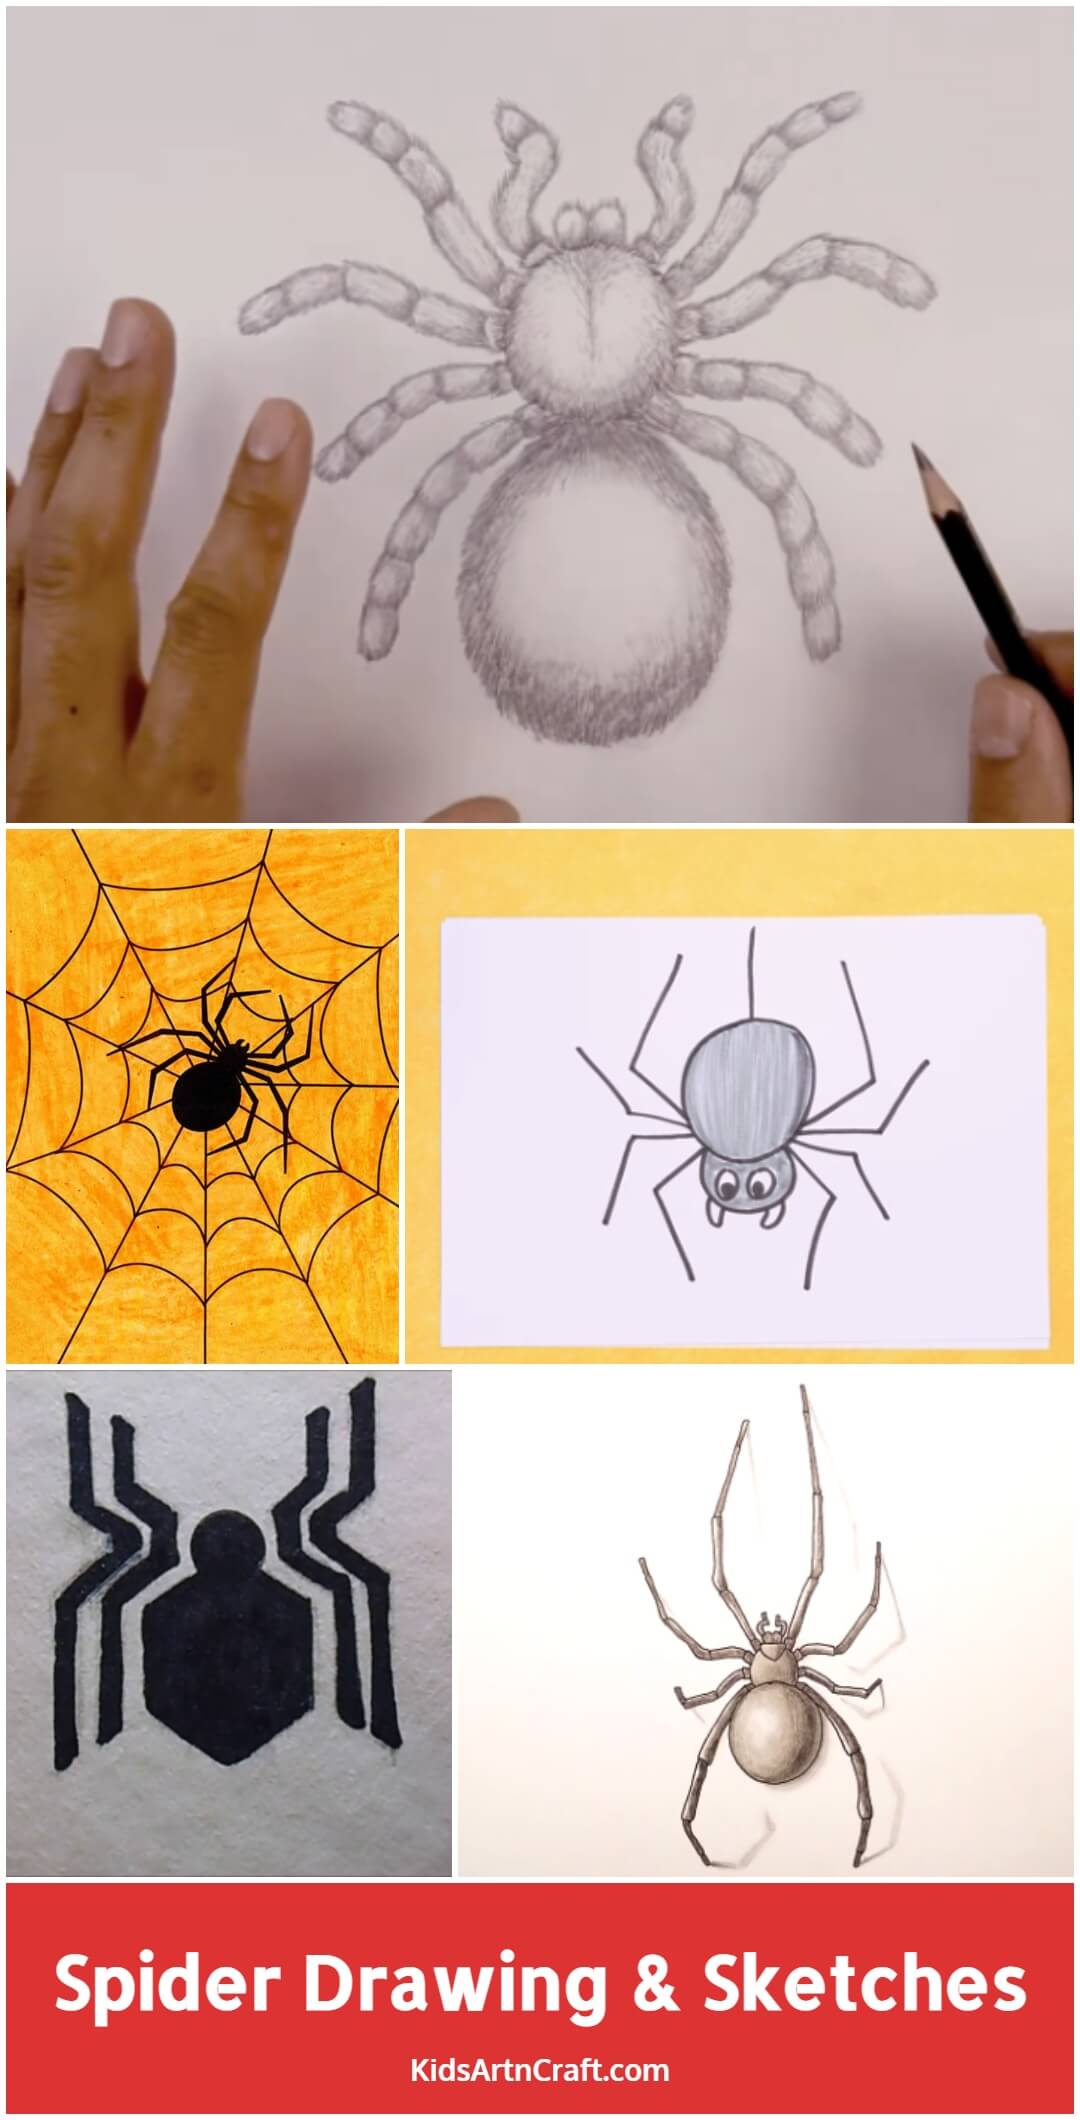 Spider Drawing & Sketches for Kids